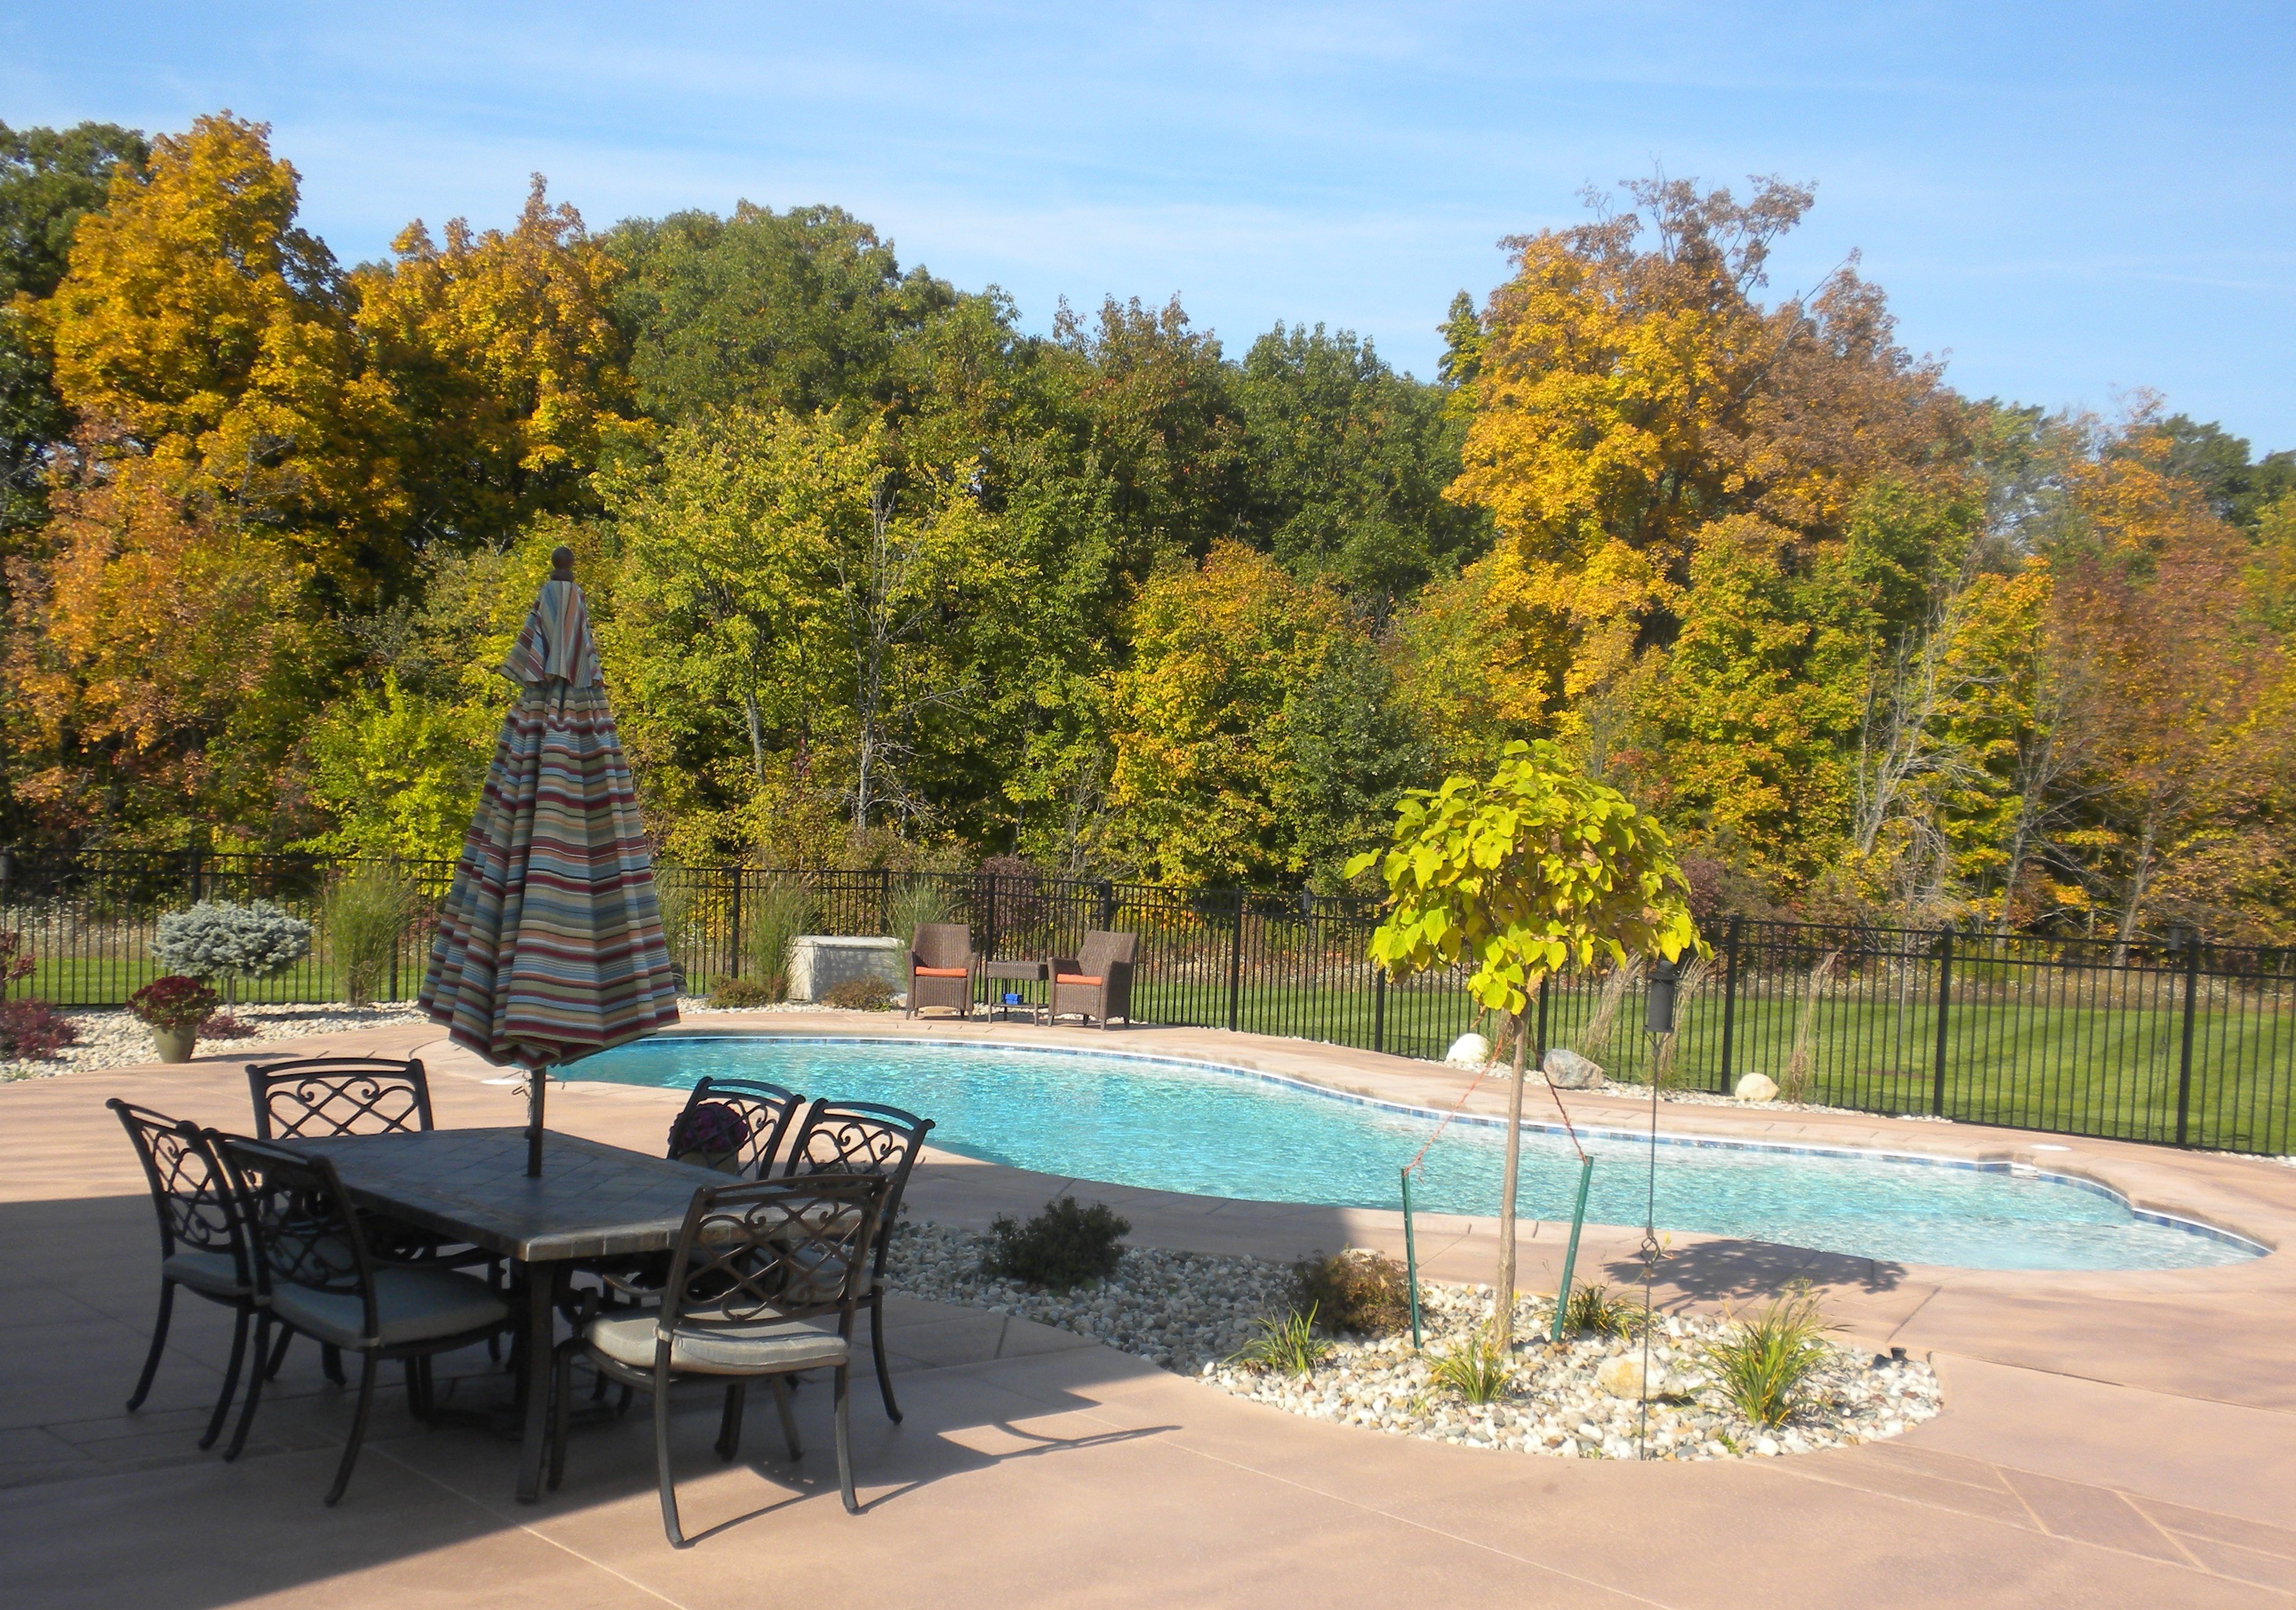 Autumn Pool Landscaping